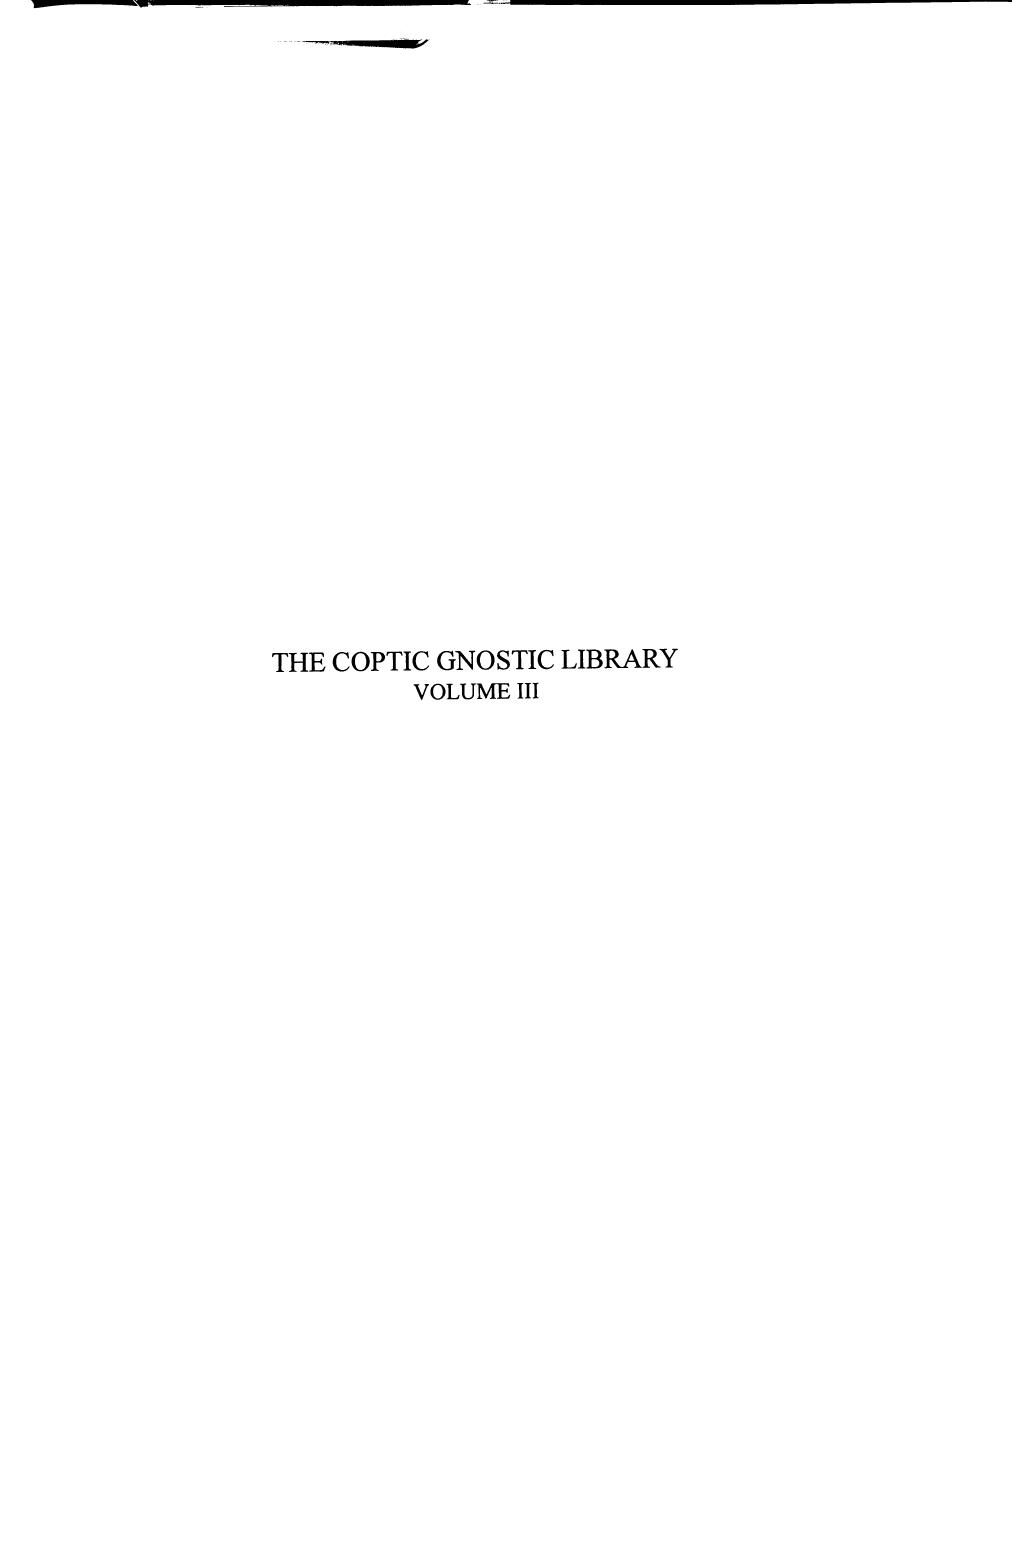 The Coptic Gnostic Library A Complete Edition of the Nag Hammadi Codices Volume 3